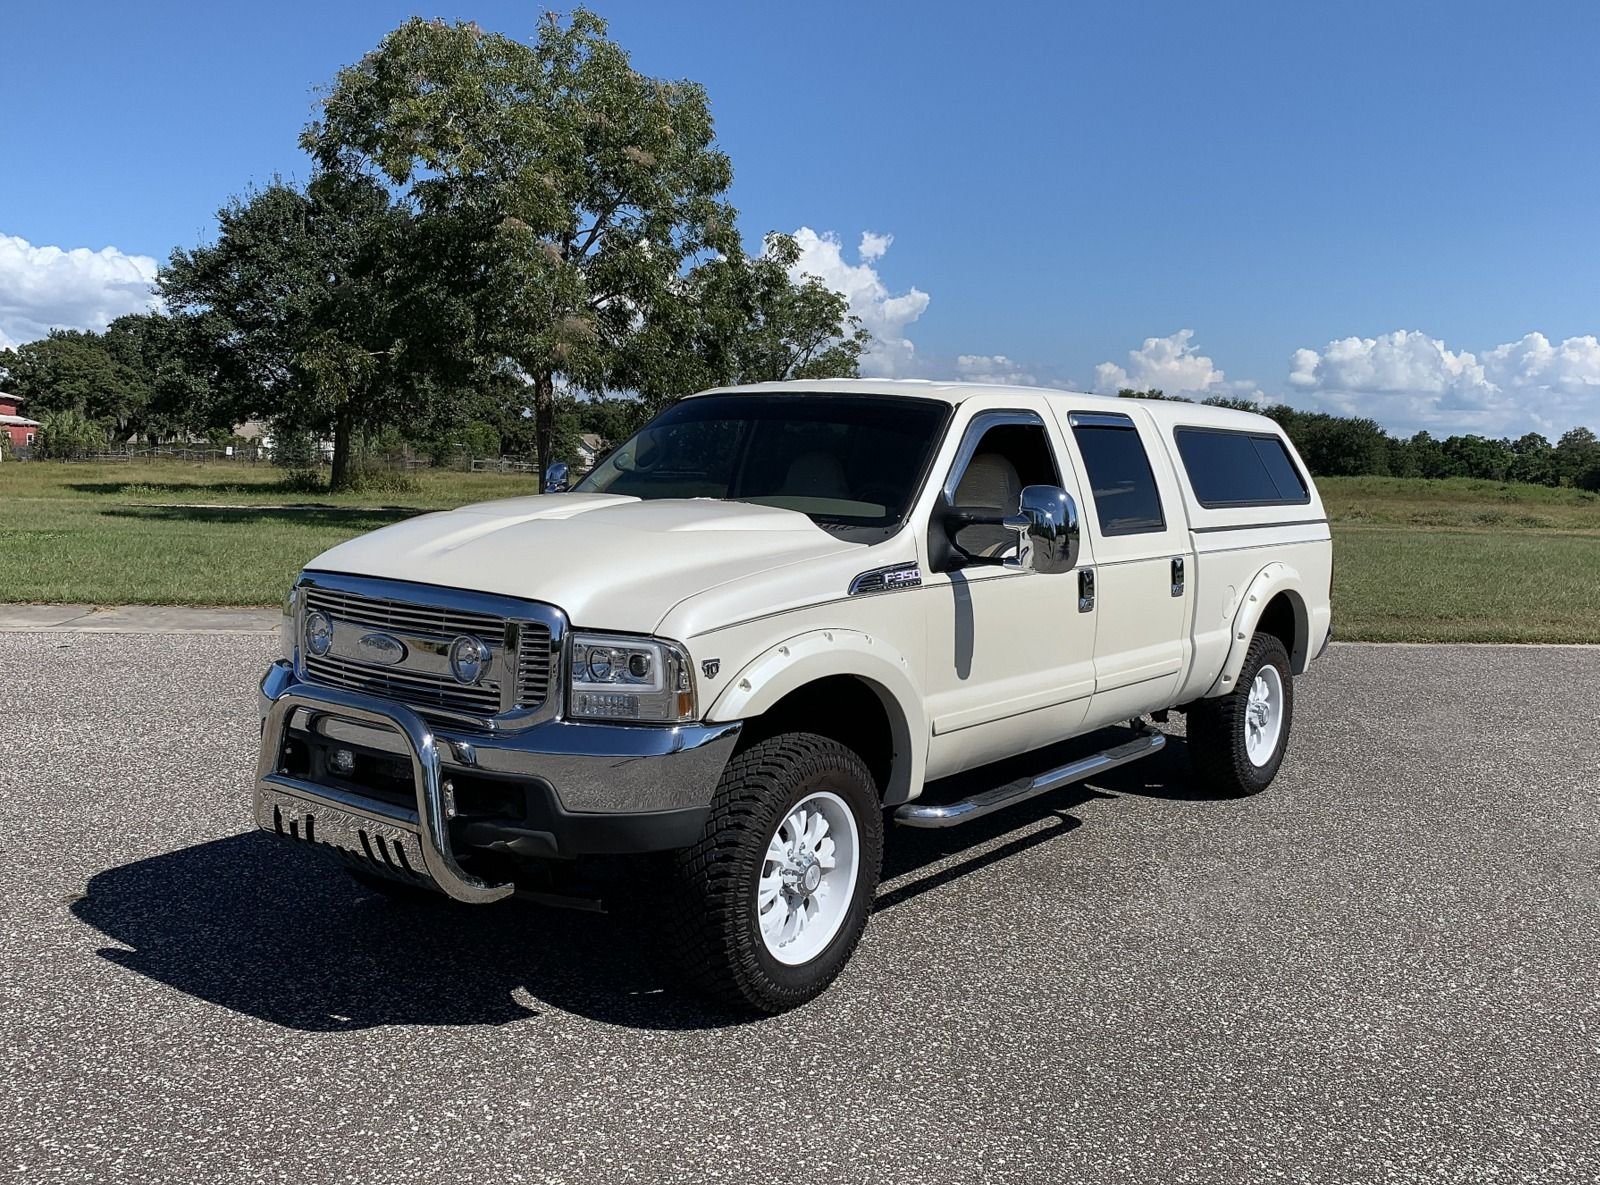 2002 Ford F350 | PJ's Auto World Classic Cars for Sale